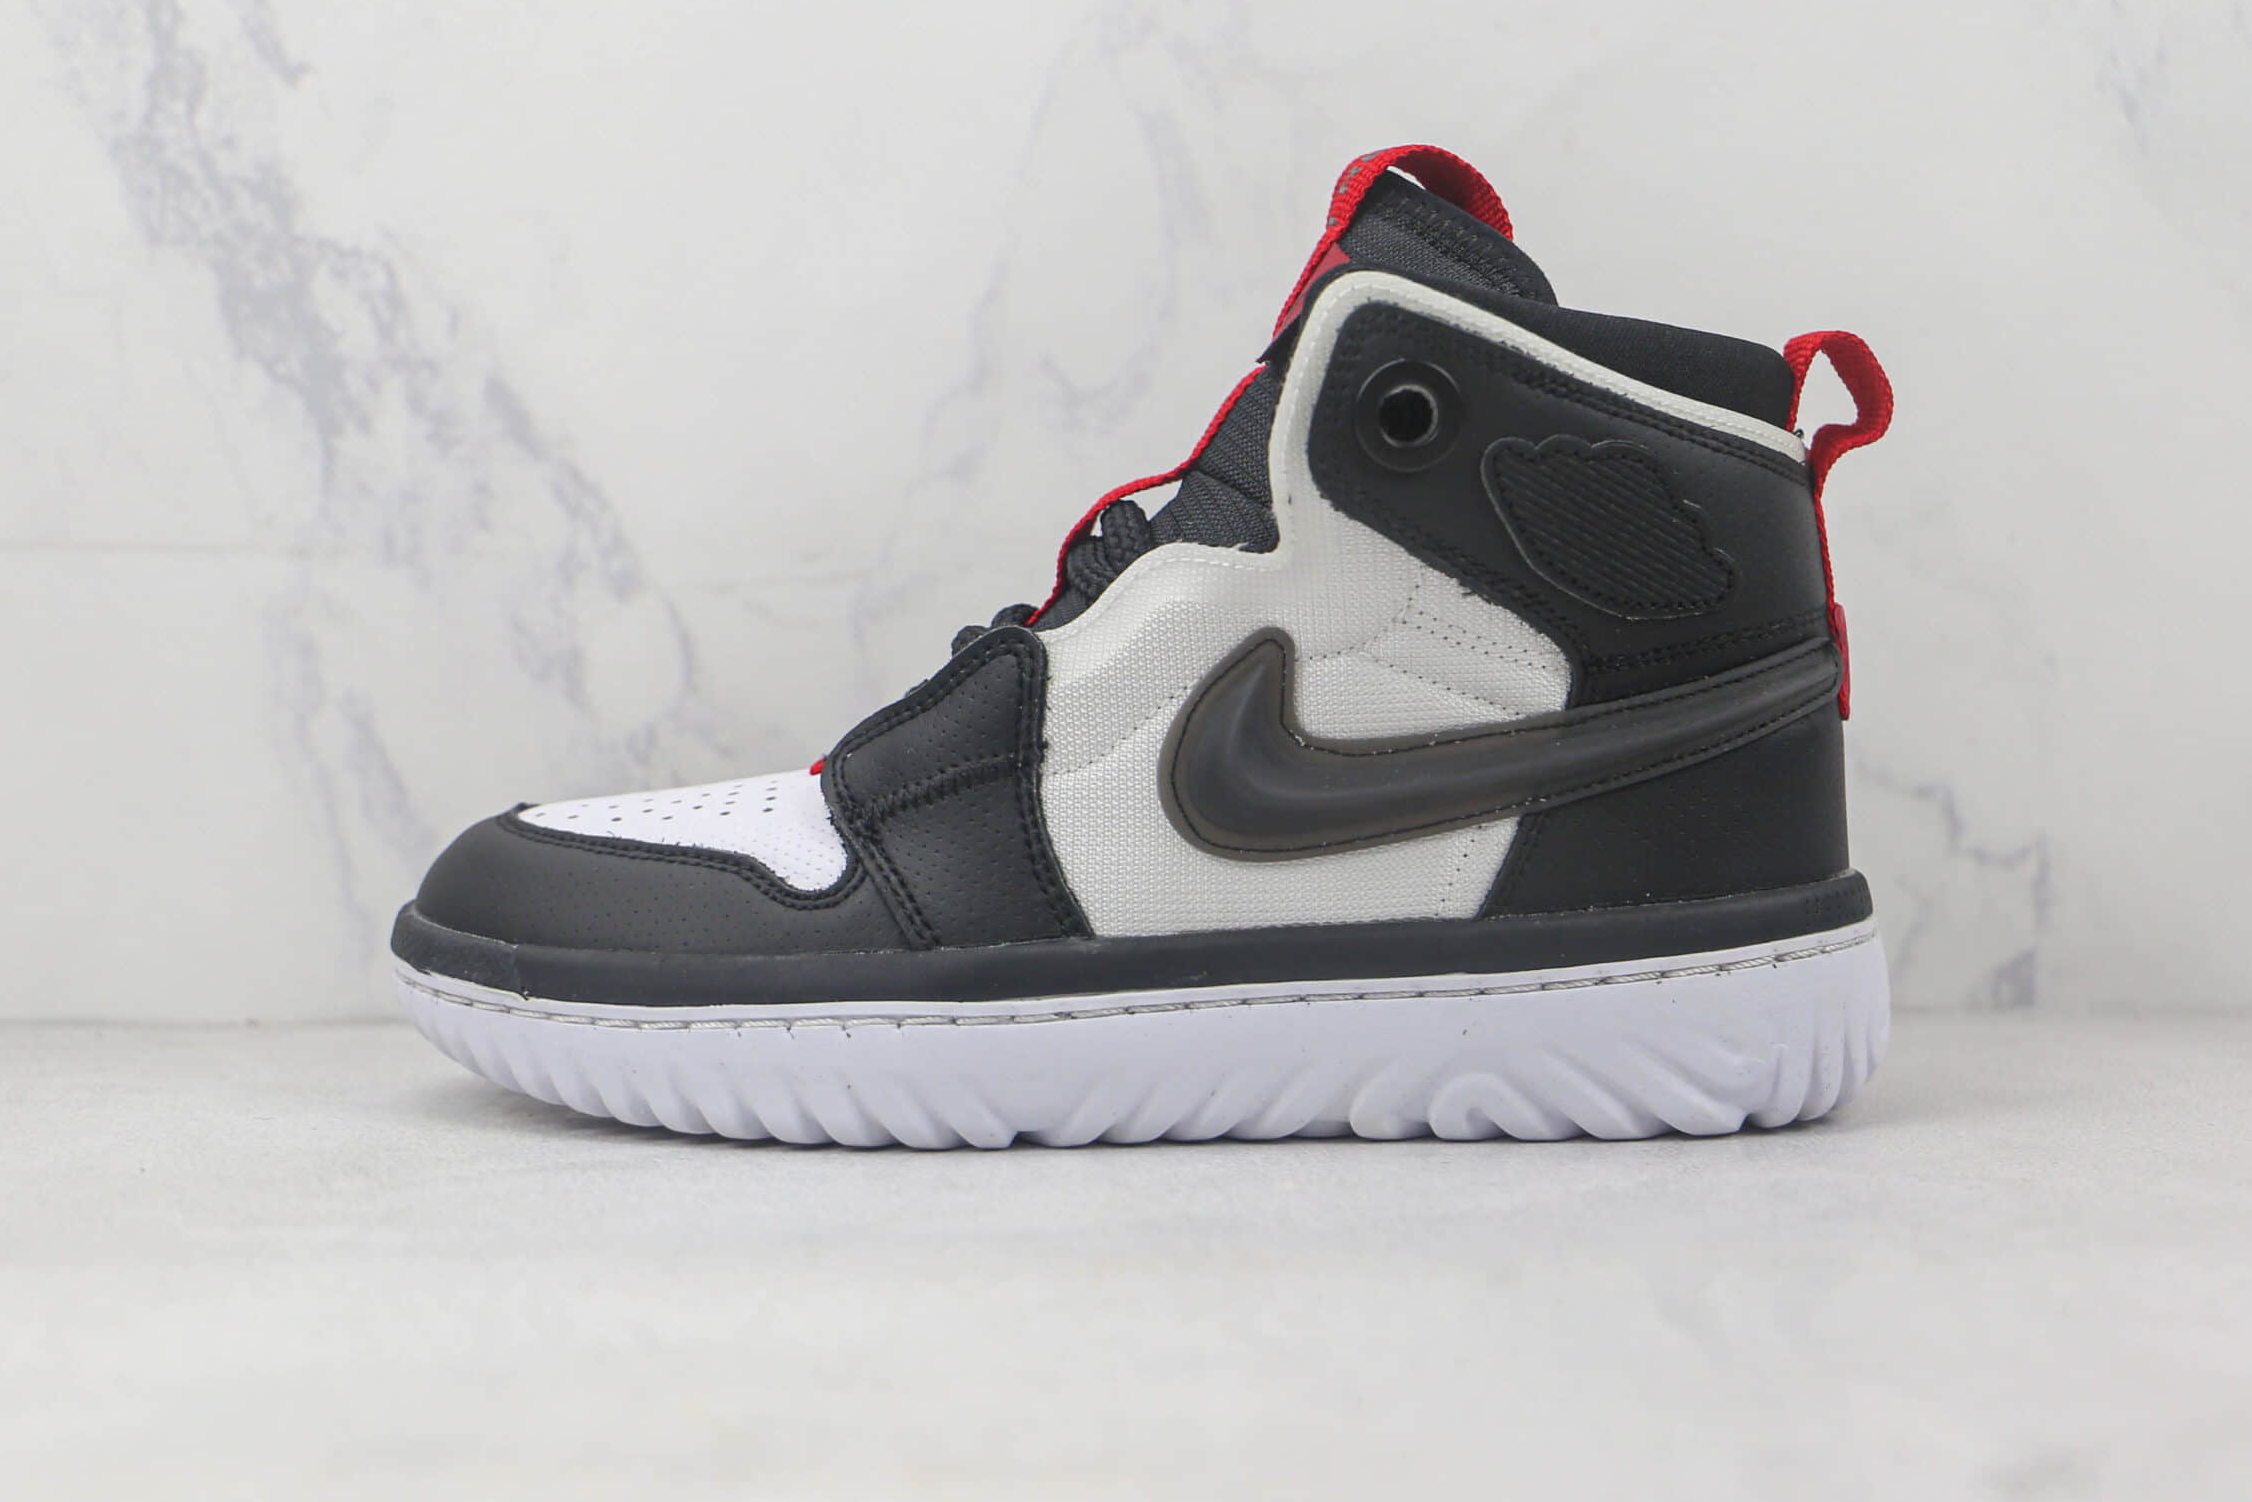 Air Jordan 1 React High 'Black White' AR5321-016 - Classic Style with Modern Comfort for Sneaker Enthusiasts